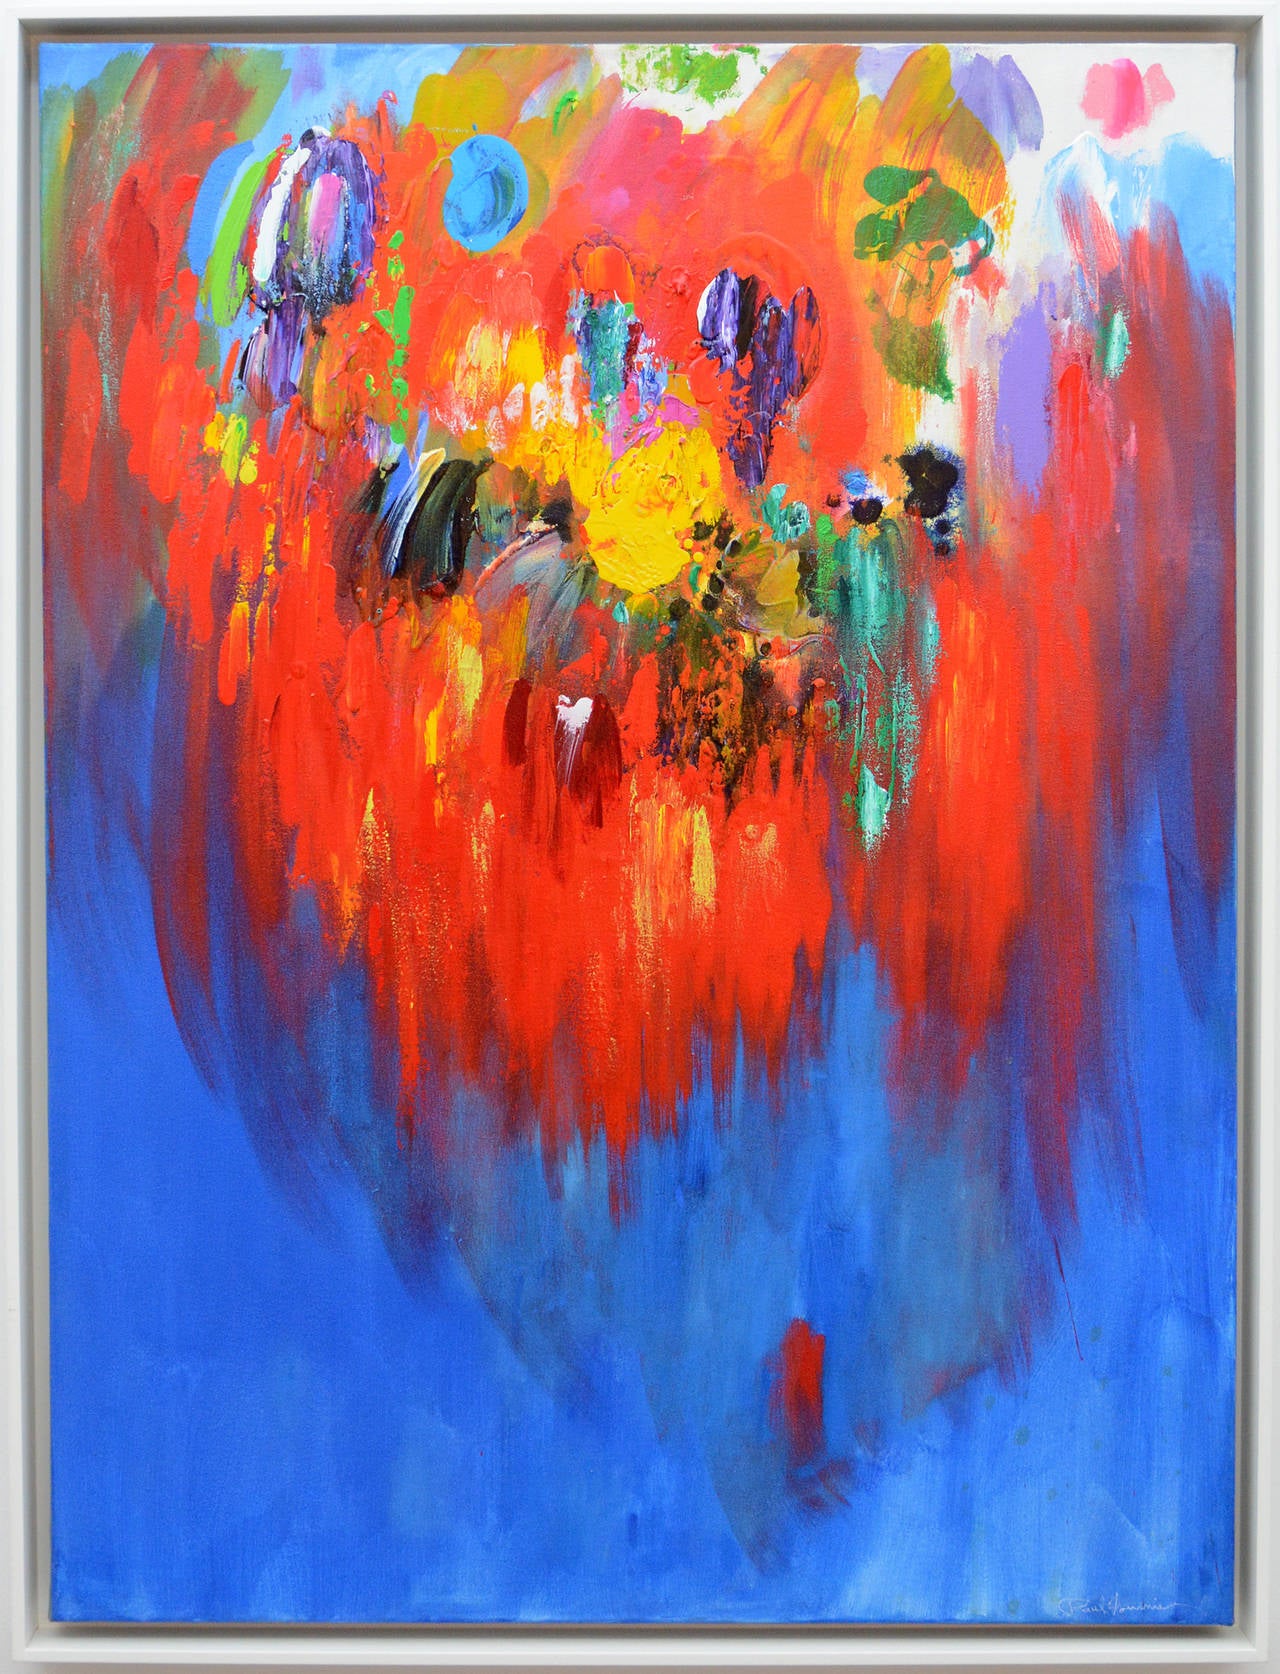 Firebird Red - bright, bold, blue, yellow, green, abstract, acrylic on canvas - Painting by Paul Fournier